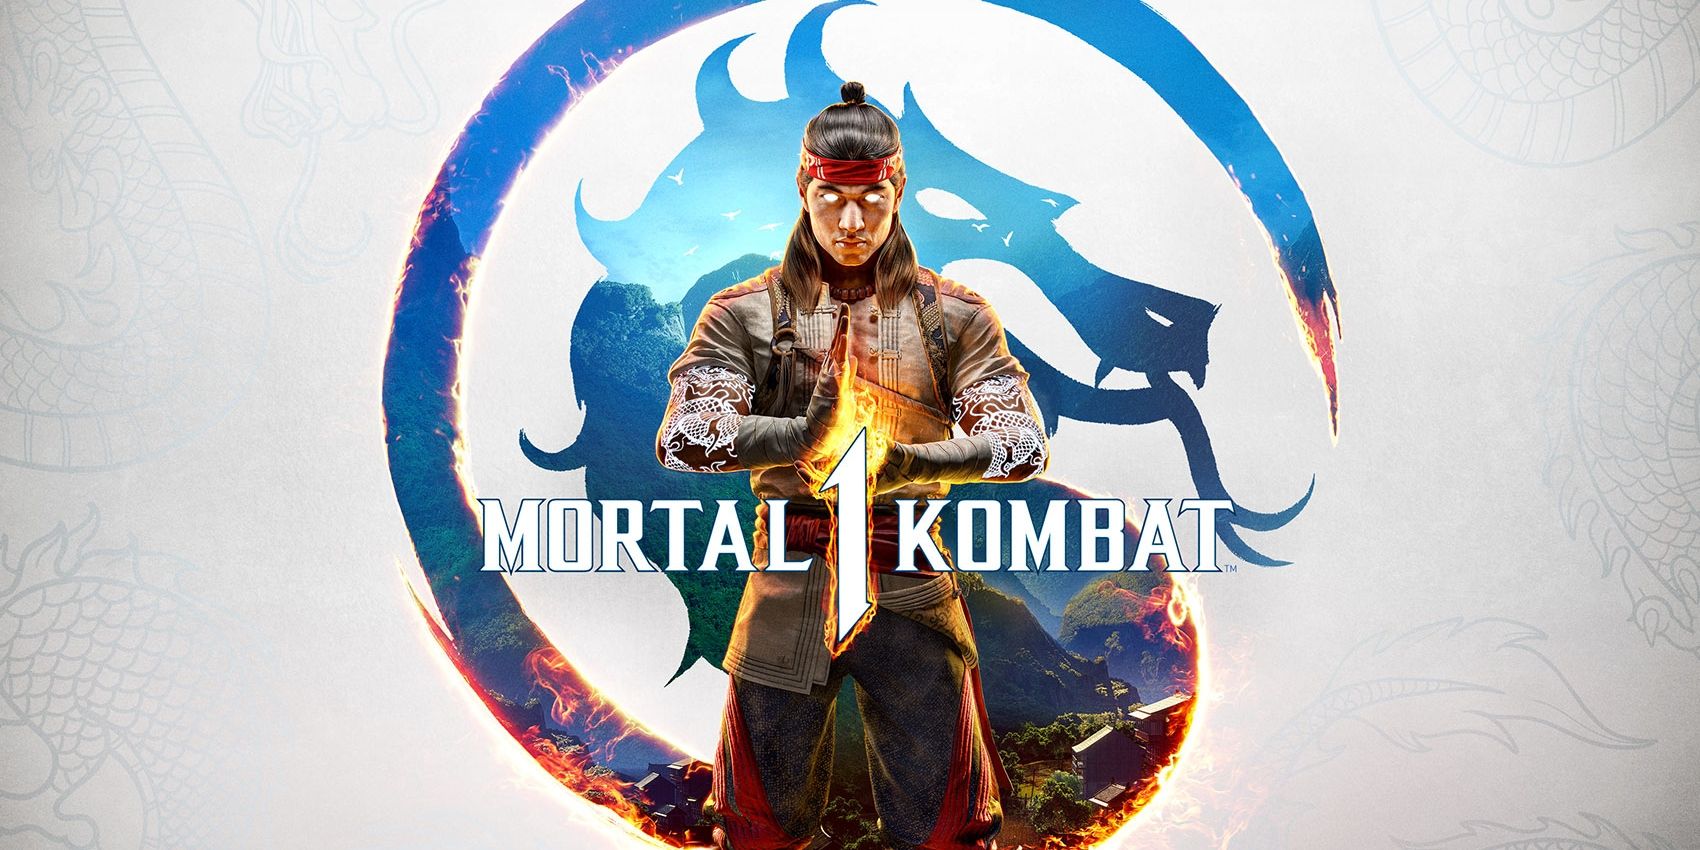 Mortal Kombat 1's official key art, featuring Liu Kang posing with his eyes glowing a bright white light, in front of the Mortal Kombat logo.